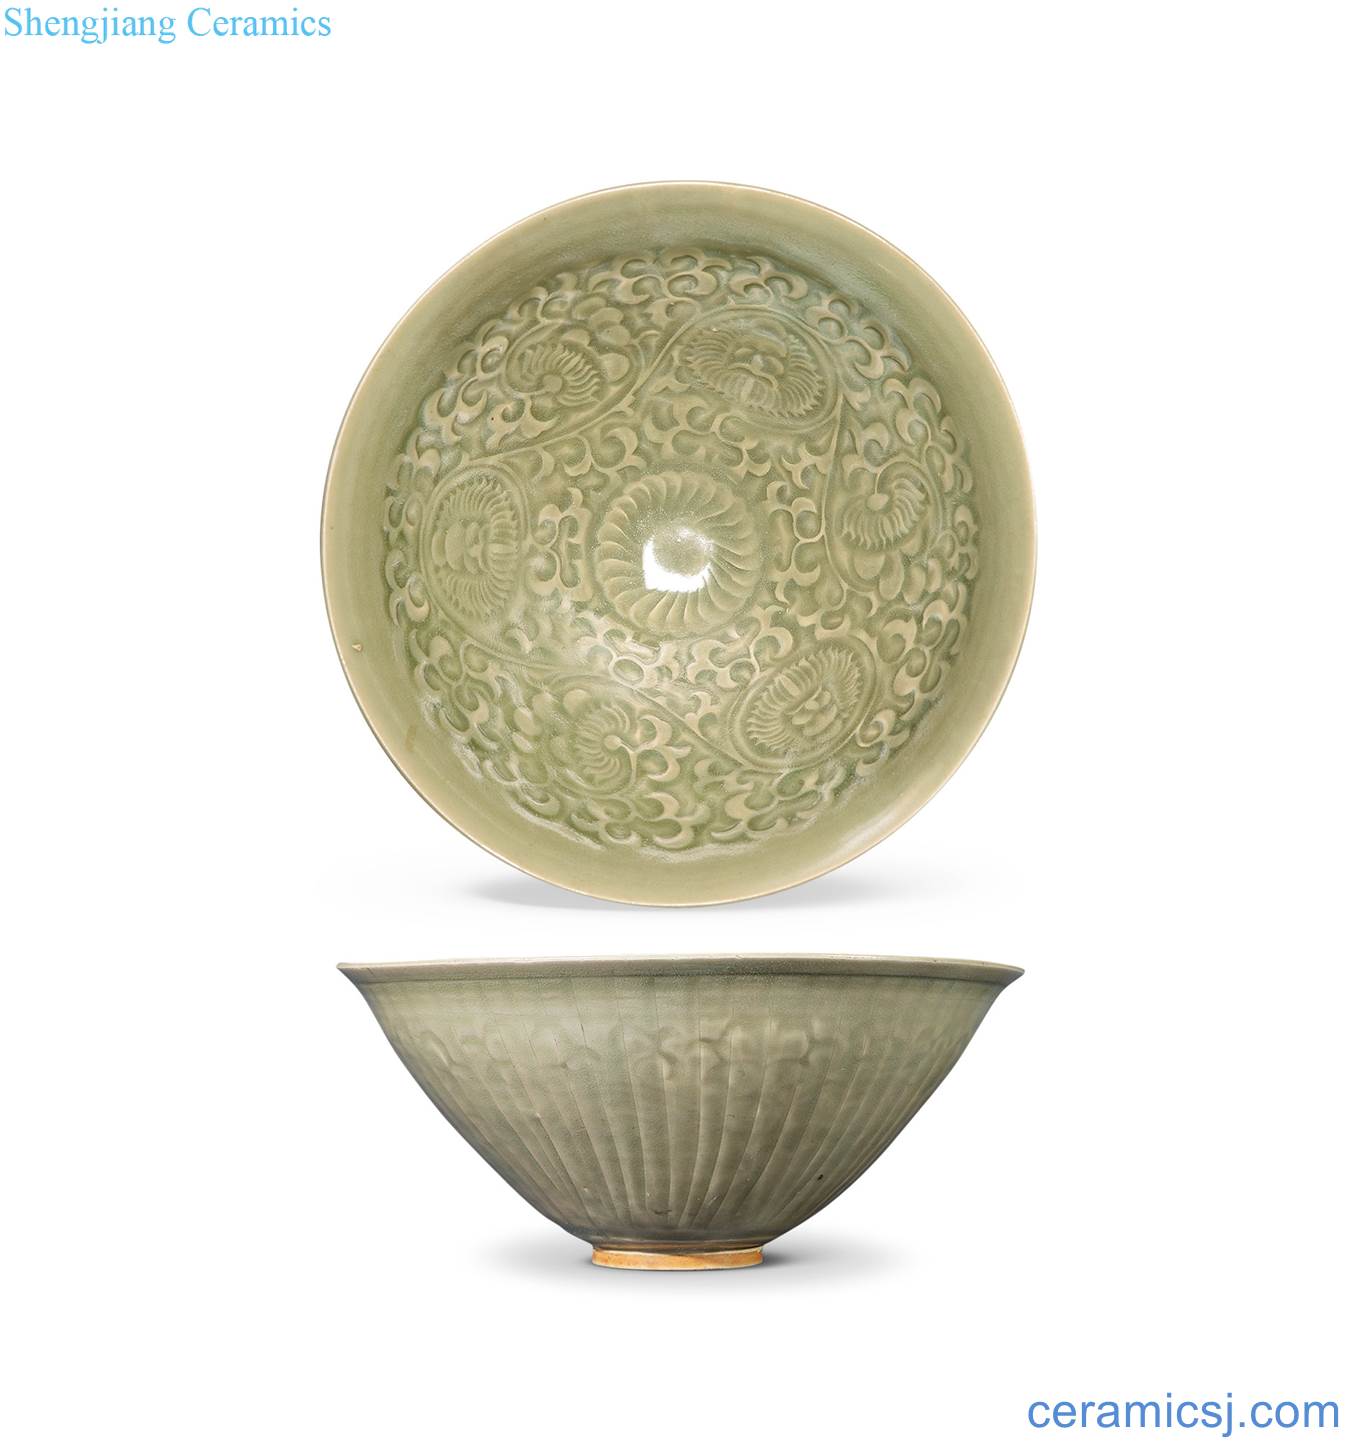 The song dynasty Yao state kiln printed flower pattern bowl